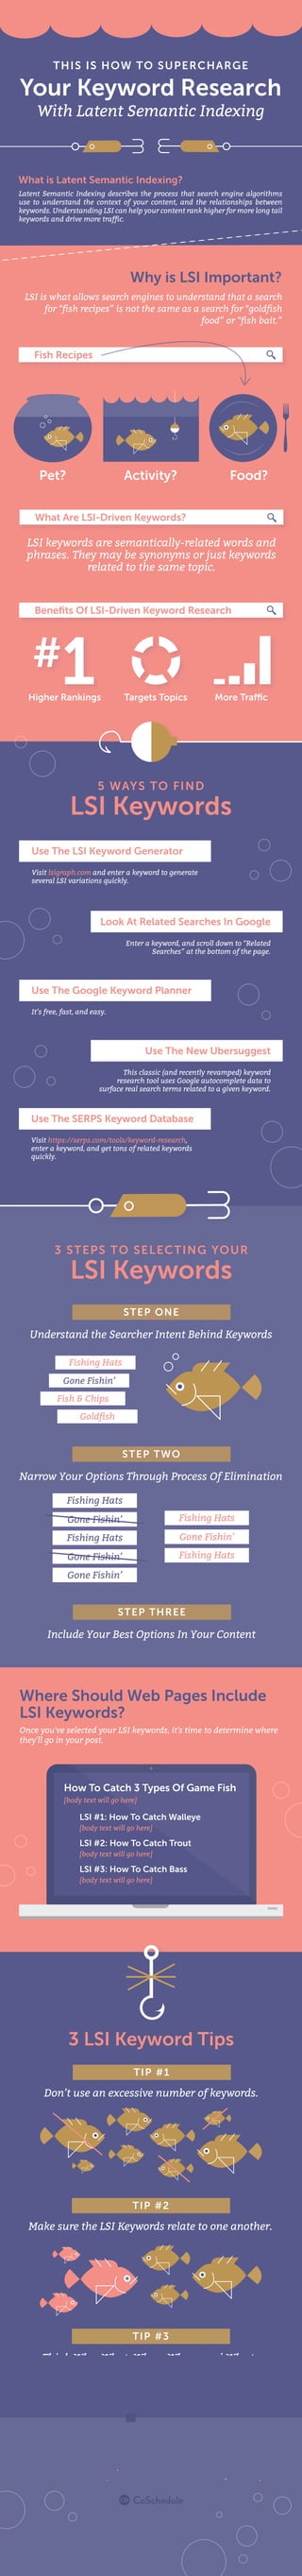 THIS IS HOW TO SUPERCHARGE
Your Keyword Research
With Latent Semantic Indexing
What is Latent Semantic Indexing?
Latent Semantic Indexing describes the process that search engine algorithms
use to understand the context of your content, and the relationships between
keywords. Understanding LSI can help your content rank higher for more long tail
keywords and drive more trafﬁc.
Why is LSI Important?
LSI is what allows search engines to understand that a search
for “ﬁsh recipes” is not the same as a search for “goldﬁsh
food” or “ﬁsh bait.”
Pet? Activity? Food?
Fish Recipes
Beneﬁts Of LSI-Driven Keyword Research
5 WAYS TO FIND
LSI Keywords
Use The LSI Keyword Generator
Visit lsigraph.com and enter a keyword to generate
several LSI variations quickly.
Enter a keyword, and scroll down to “Related
Searches” at the bottom of the page.
Look At Related Searches In Google
Use The Google Keyword Planner
It’s free, fast, and easy.
This classic (and recently revamped) keyword
research tool uses Google autocomplete data to
surface real search terms related to a given keyword.
Use The New Ubersuggest
Use The SERPS Keyword Database
Visit https://serps.com/tools/keyword-research,
enter a keyword, and get tons of related keywords
quickly.
3 STEPS TO SELECTING YOUR
LSI Keywords
STEP ONE
Understand the Searcher Intent Behind Keywords
STEP TWO
Narrow Your Options Through Process Of Elimination
STEP THREE
Include Your Best Options In Your Content
Fishing Hats
Gone Fishin’
Fish & Chips
Goldﬁsh
Fishing Hats
Gone Fishin’
Fishing Hats
Gone Fishin’
Gone Fishin’
Fishing Hats
Gone Fishin’
Fishing Hats
Where Should Web Pages Include
LSI Keywords?
Once you've selected your LSI keywords, it's time to determine where
they'll go in your post.
How To Catch 3 Types Of Game Fish
[body text will go here]
LSI #1: How To Catch Walleye
[body text will go here]
LSI #2: How To Catch Trout
[body text will go here]
LSI #3: How To Catch Bass
[body text will go here]
3 LSI Keyword Tips
TIP #1
Don’t use an excessive number of keywords.
TIP #2
Make sure the LSI Keywords relate to one another.
TIP #3
Think Who, What, When, Where, and Why to
generate strong long tail keyword variations.
Now you know how to supercharge your keyword research with
latent semantic indexing. Next, supercharge your content planning
with CoSchedule. Sign up now and get a free 14-day trial.
Resources:
https://serps.com/tools/keyword-research/
https://ubersuggest.io/
http://lsigraph.com/
http://www.sempo.org/?page=glossary#l
Higher Rankings Targets Topics More Traffic
What Are LSI-Driven Keywords?
LSI keywords are semantically-related words and
phrases. They may be synonyms or just keywords
related to the same topic.
 